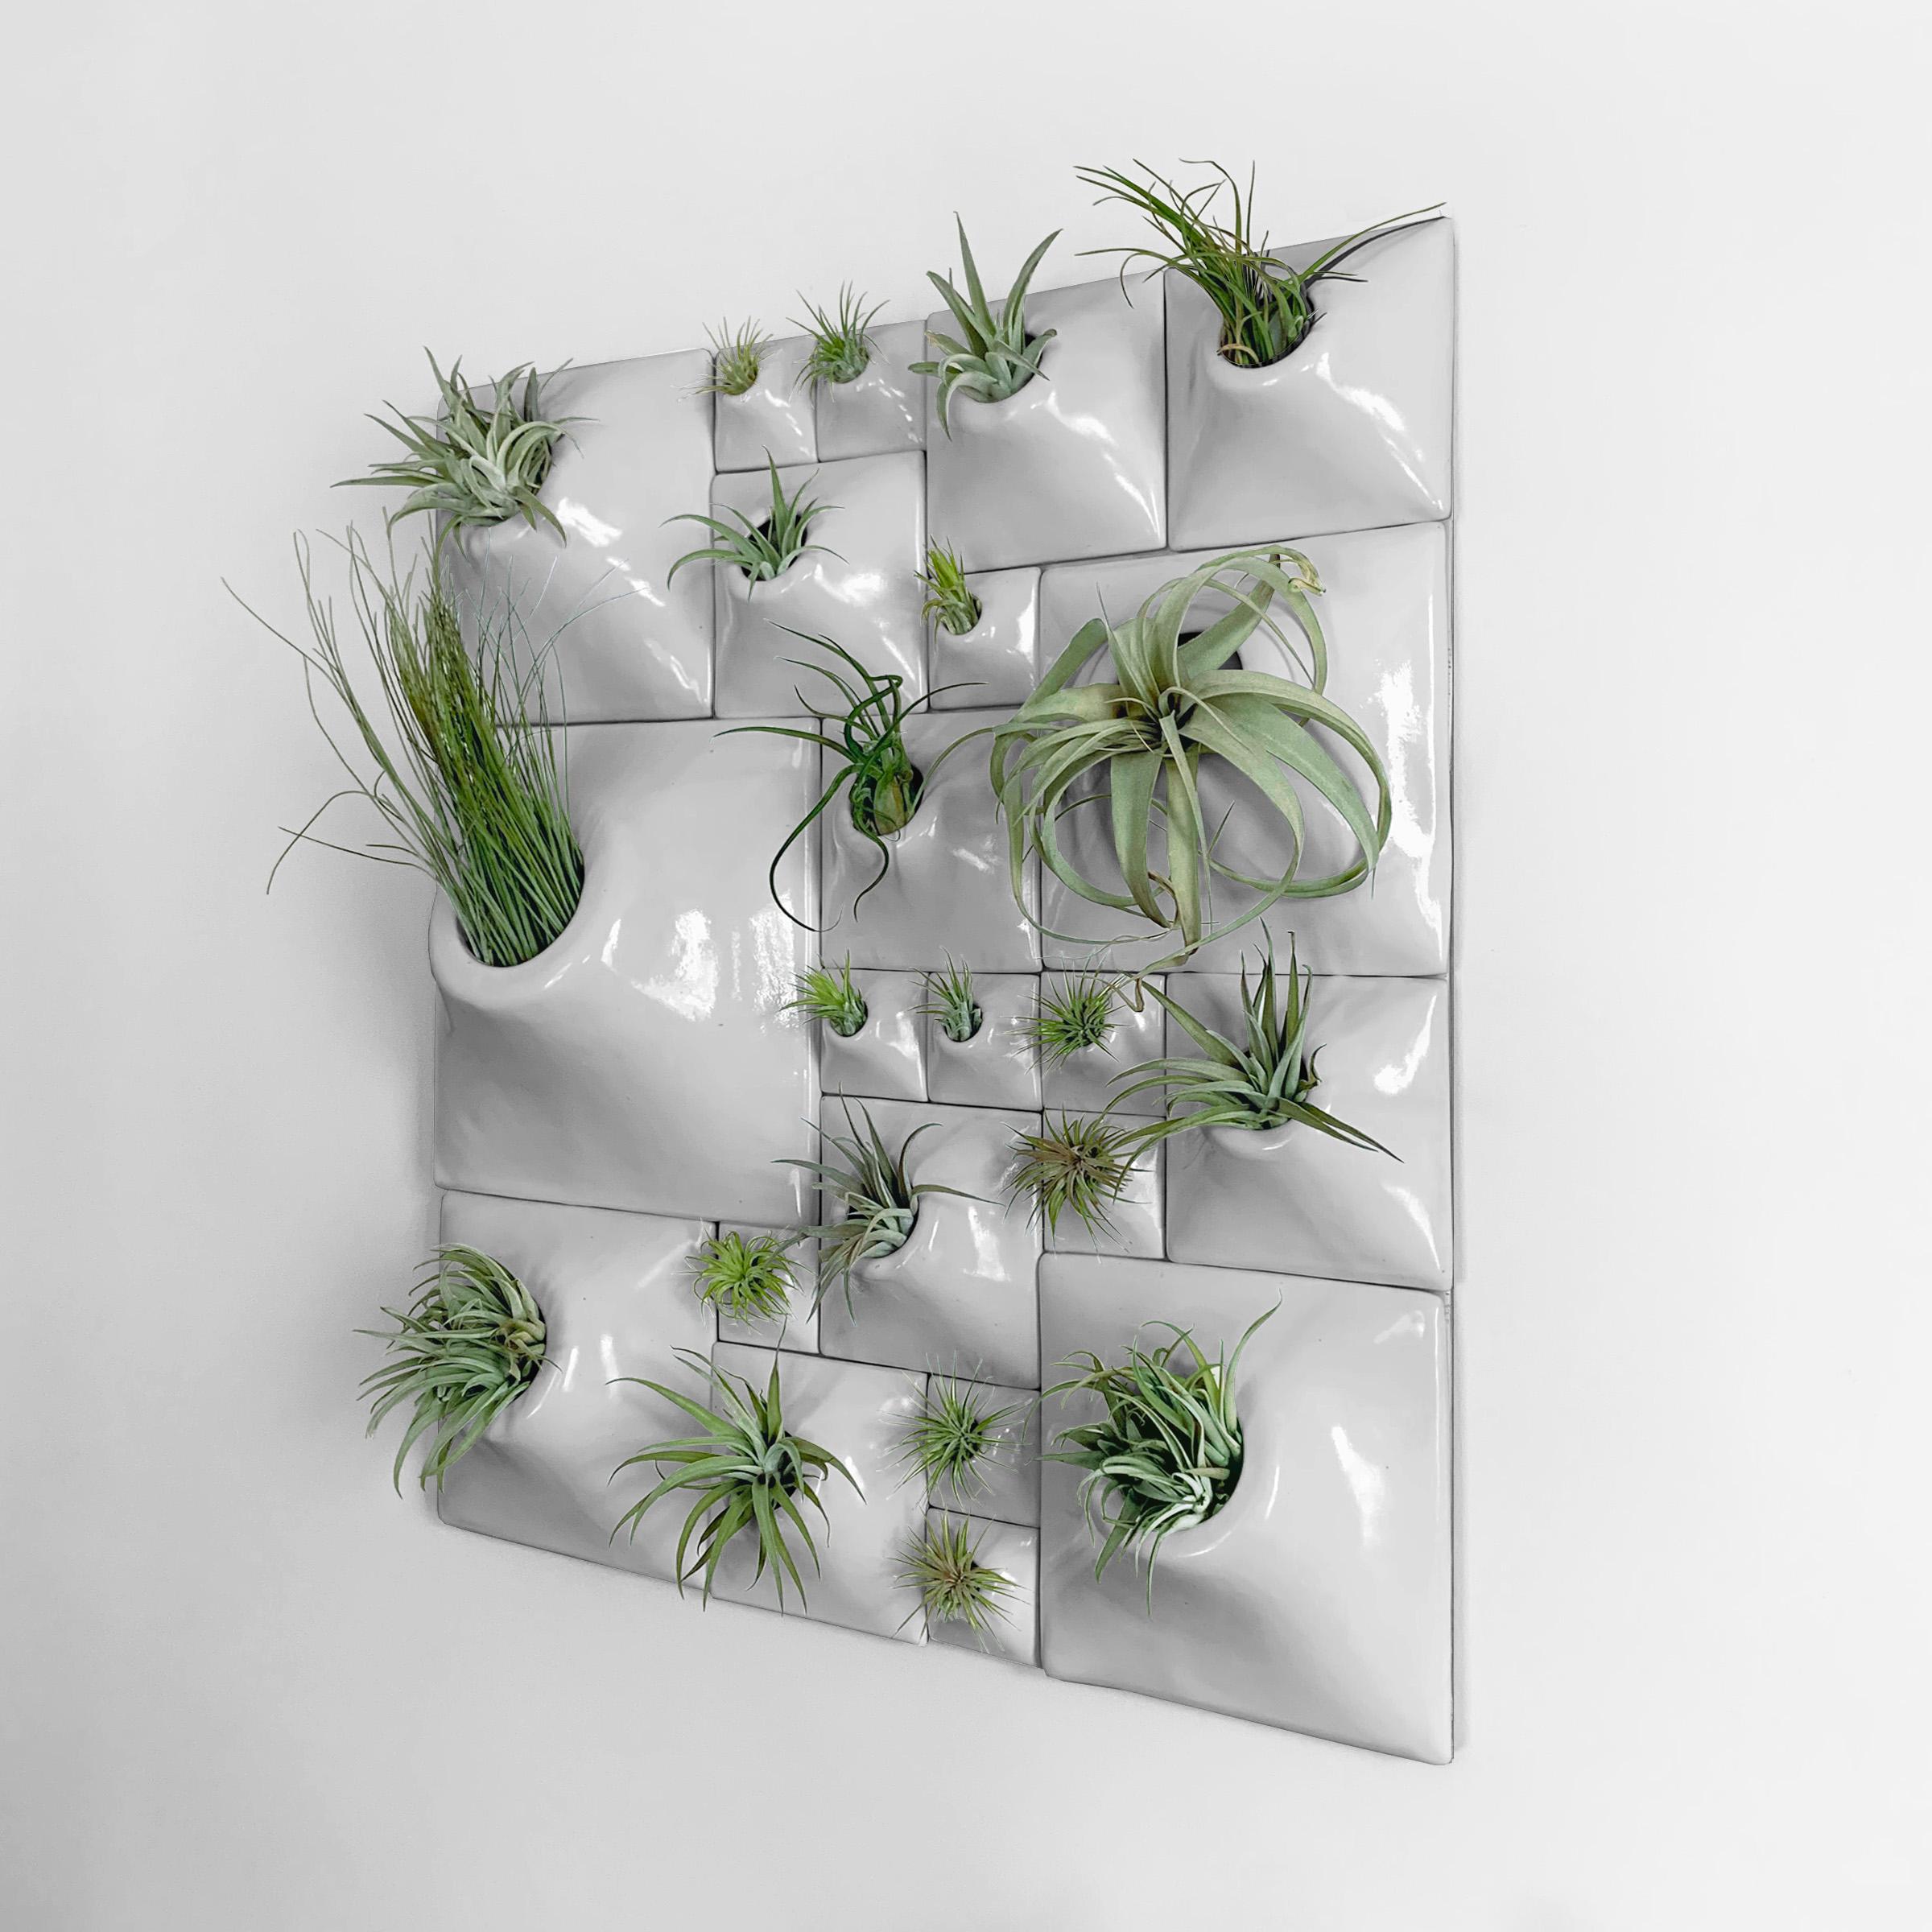 Modern Greenwall Sculpture, Plant Wall Art, Biophilic Wall Decor, Price / Sq Ft For Sale 3